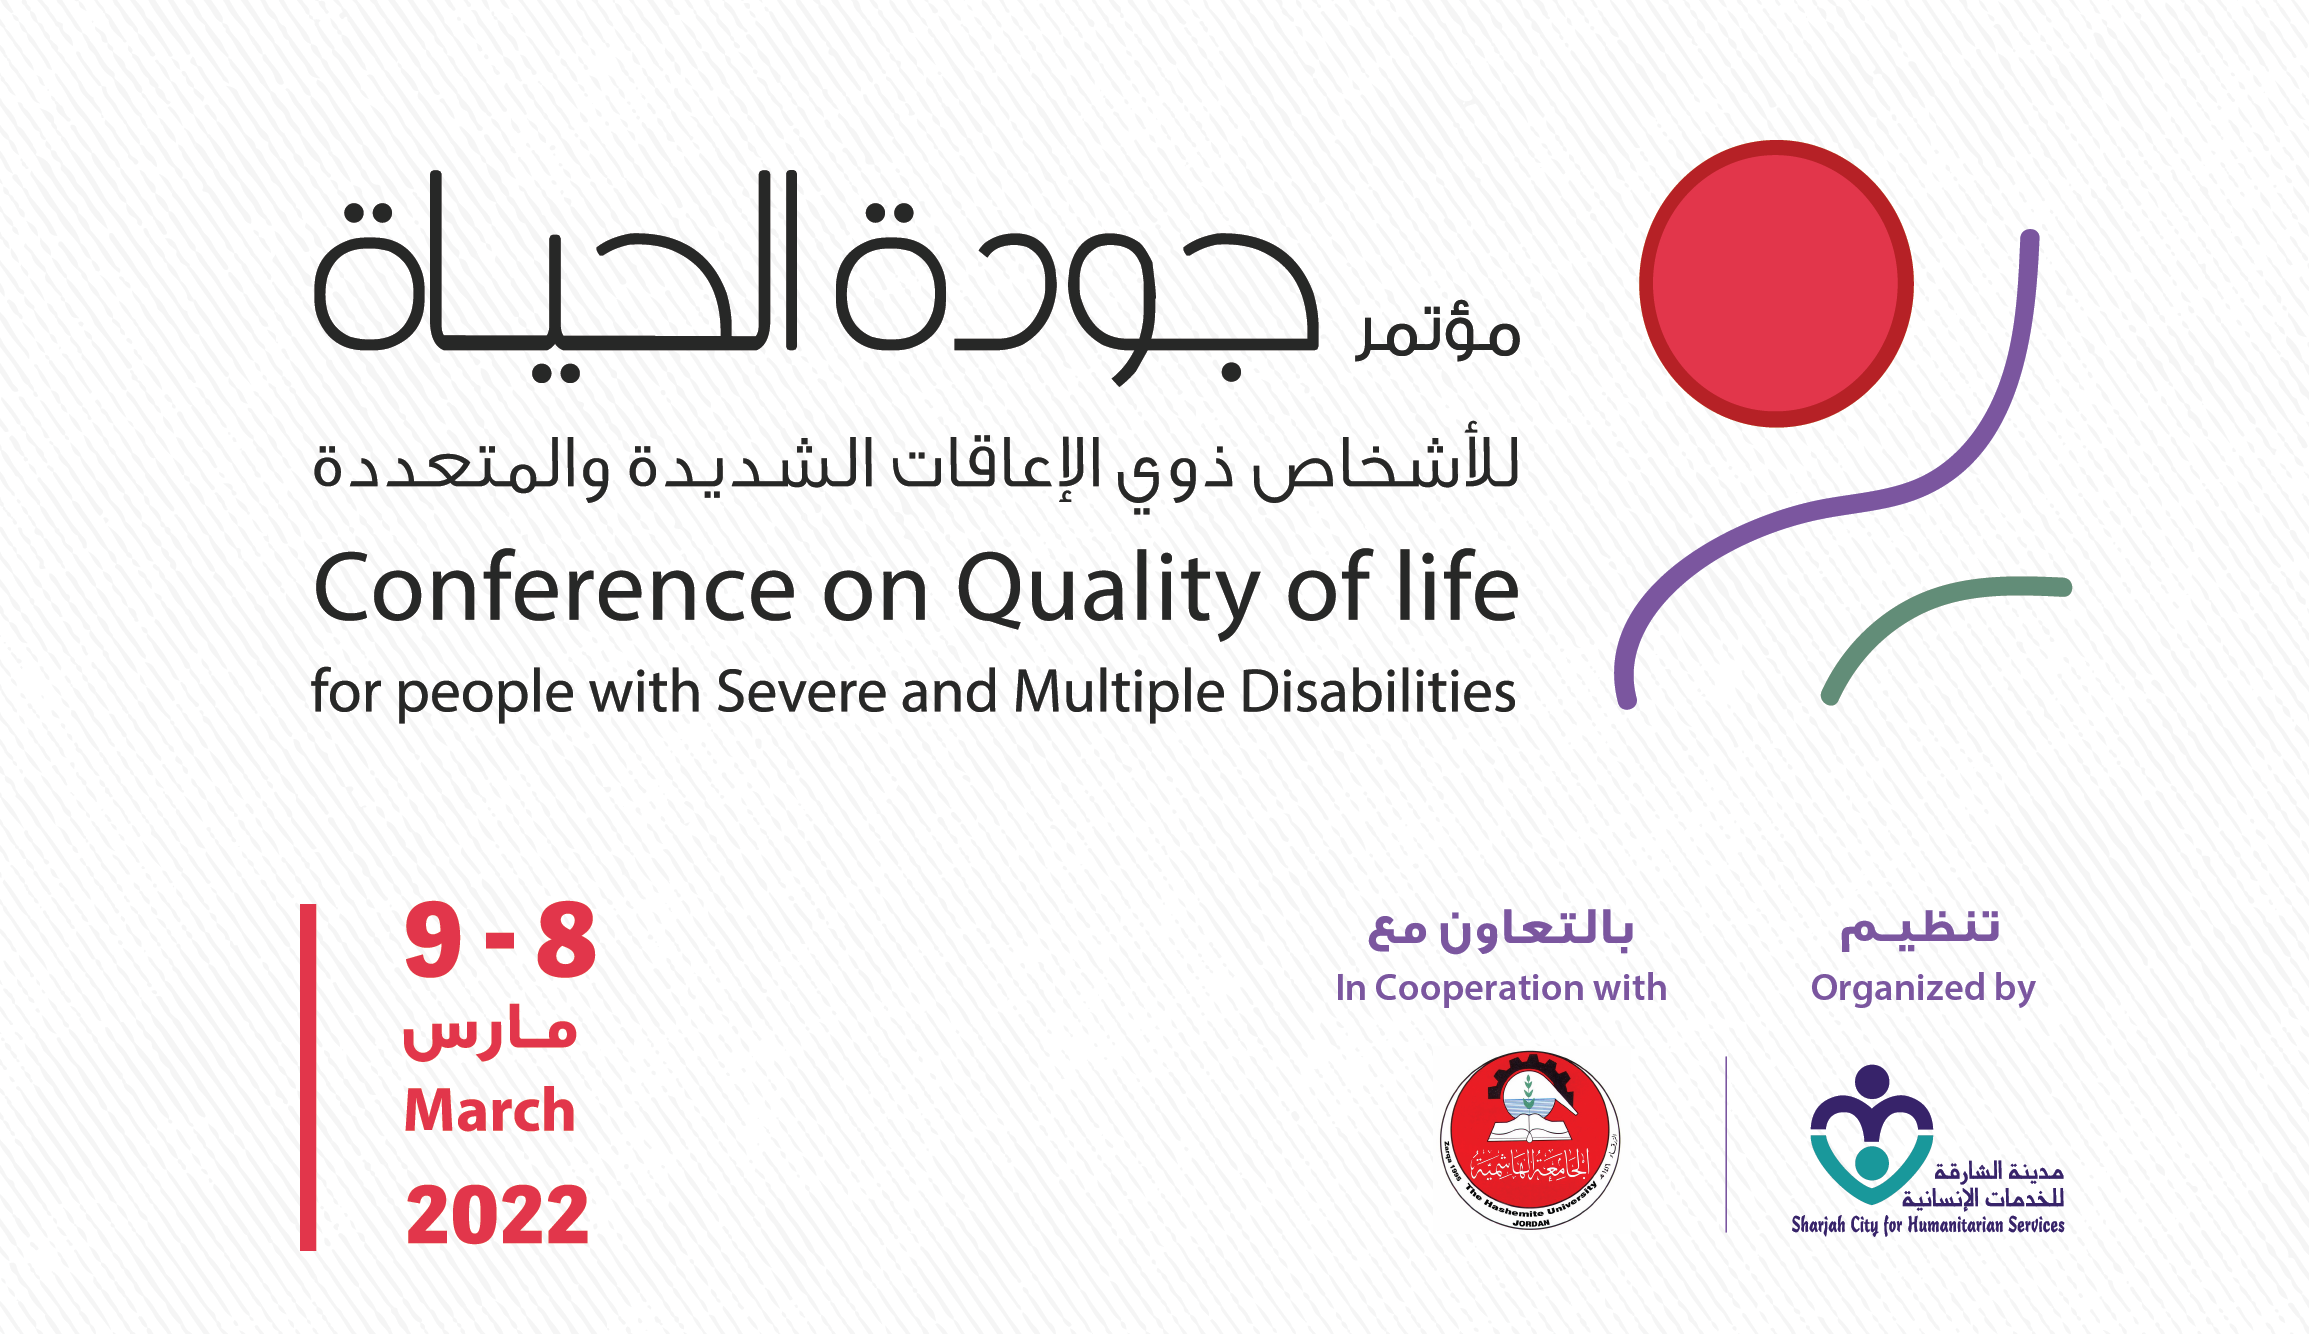 https://www.schs.ae/ar/event-detail/almtmr-alaalmy-aldoly-alaftrady-god-alhya-llashkhas-thoy-alaaakat-alshdyd-oalmtaaddThe Virtual International Scientific Conference On Quality of life for People with Severe and Multiple Disabilities